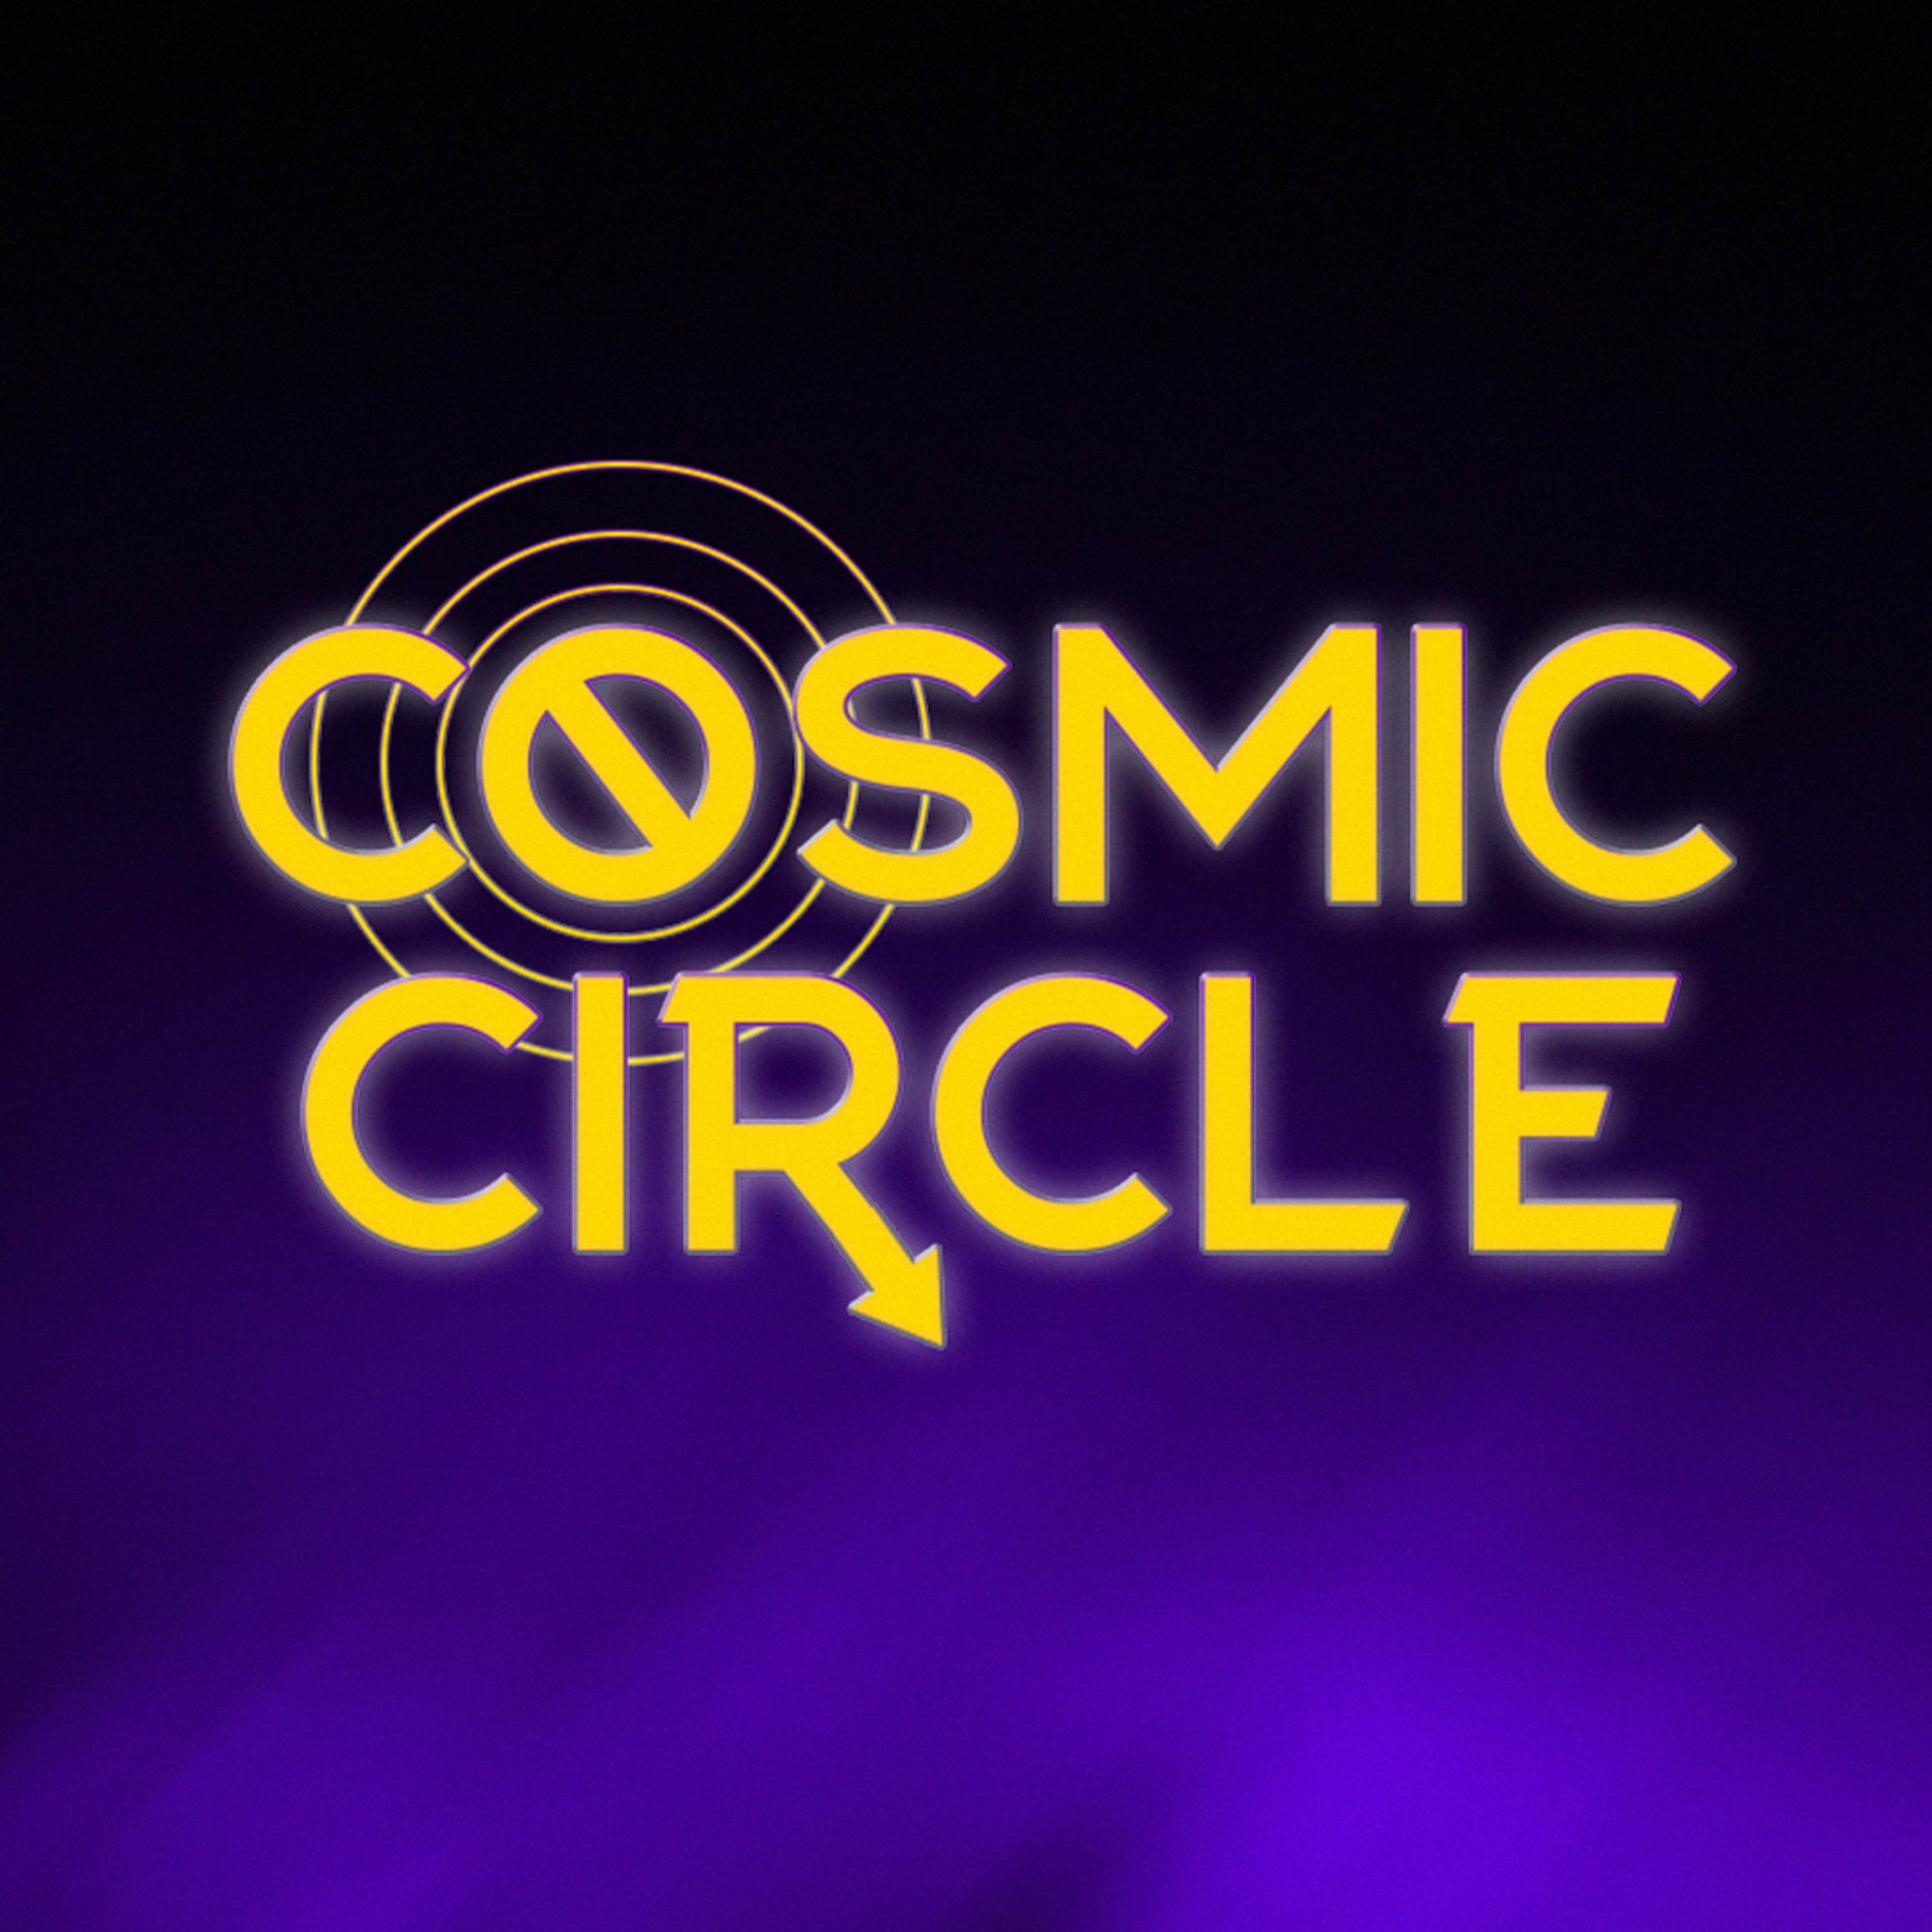 The Cosmic Circle Episode 3: Marvel's Hawkeye Episodes 1 and 2 Discussion